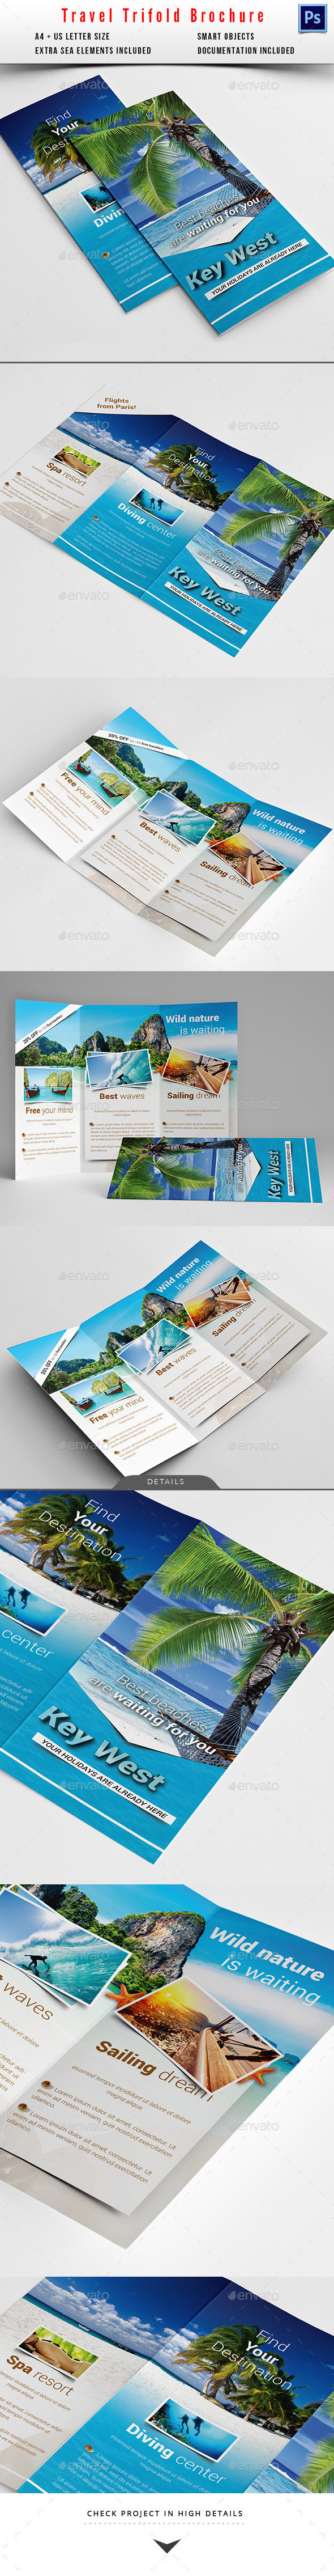 Travel brochure preview